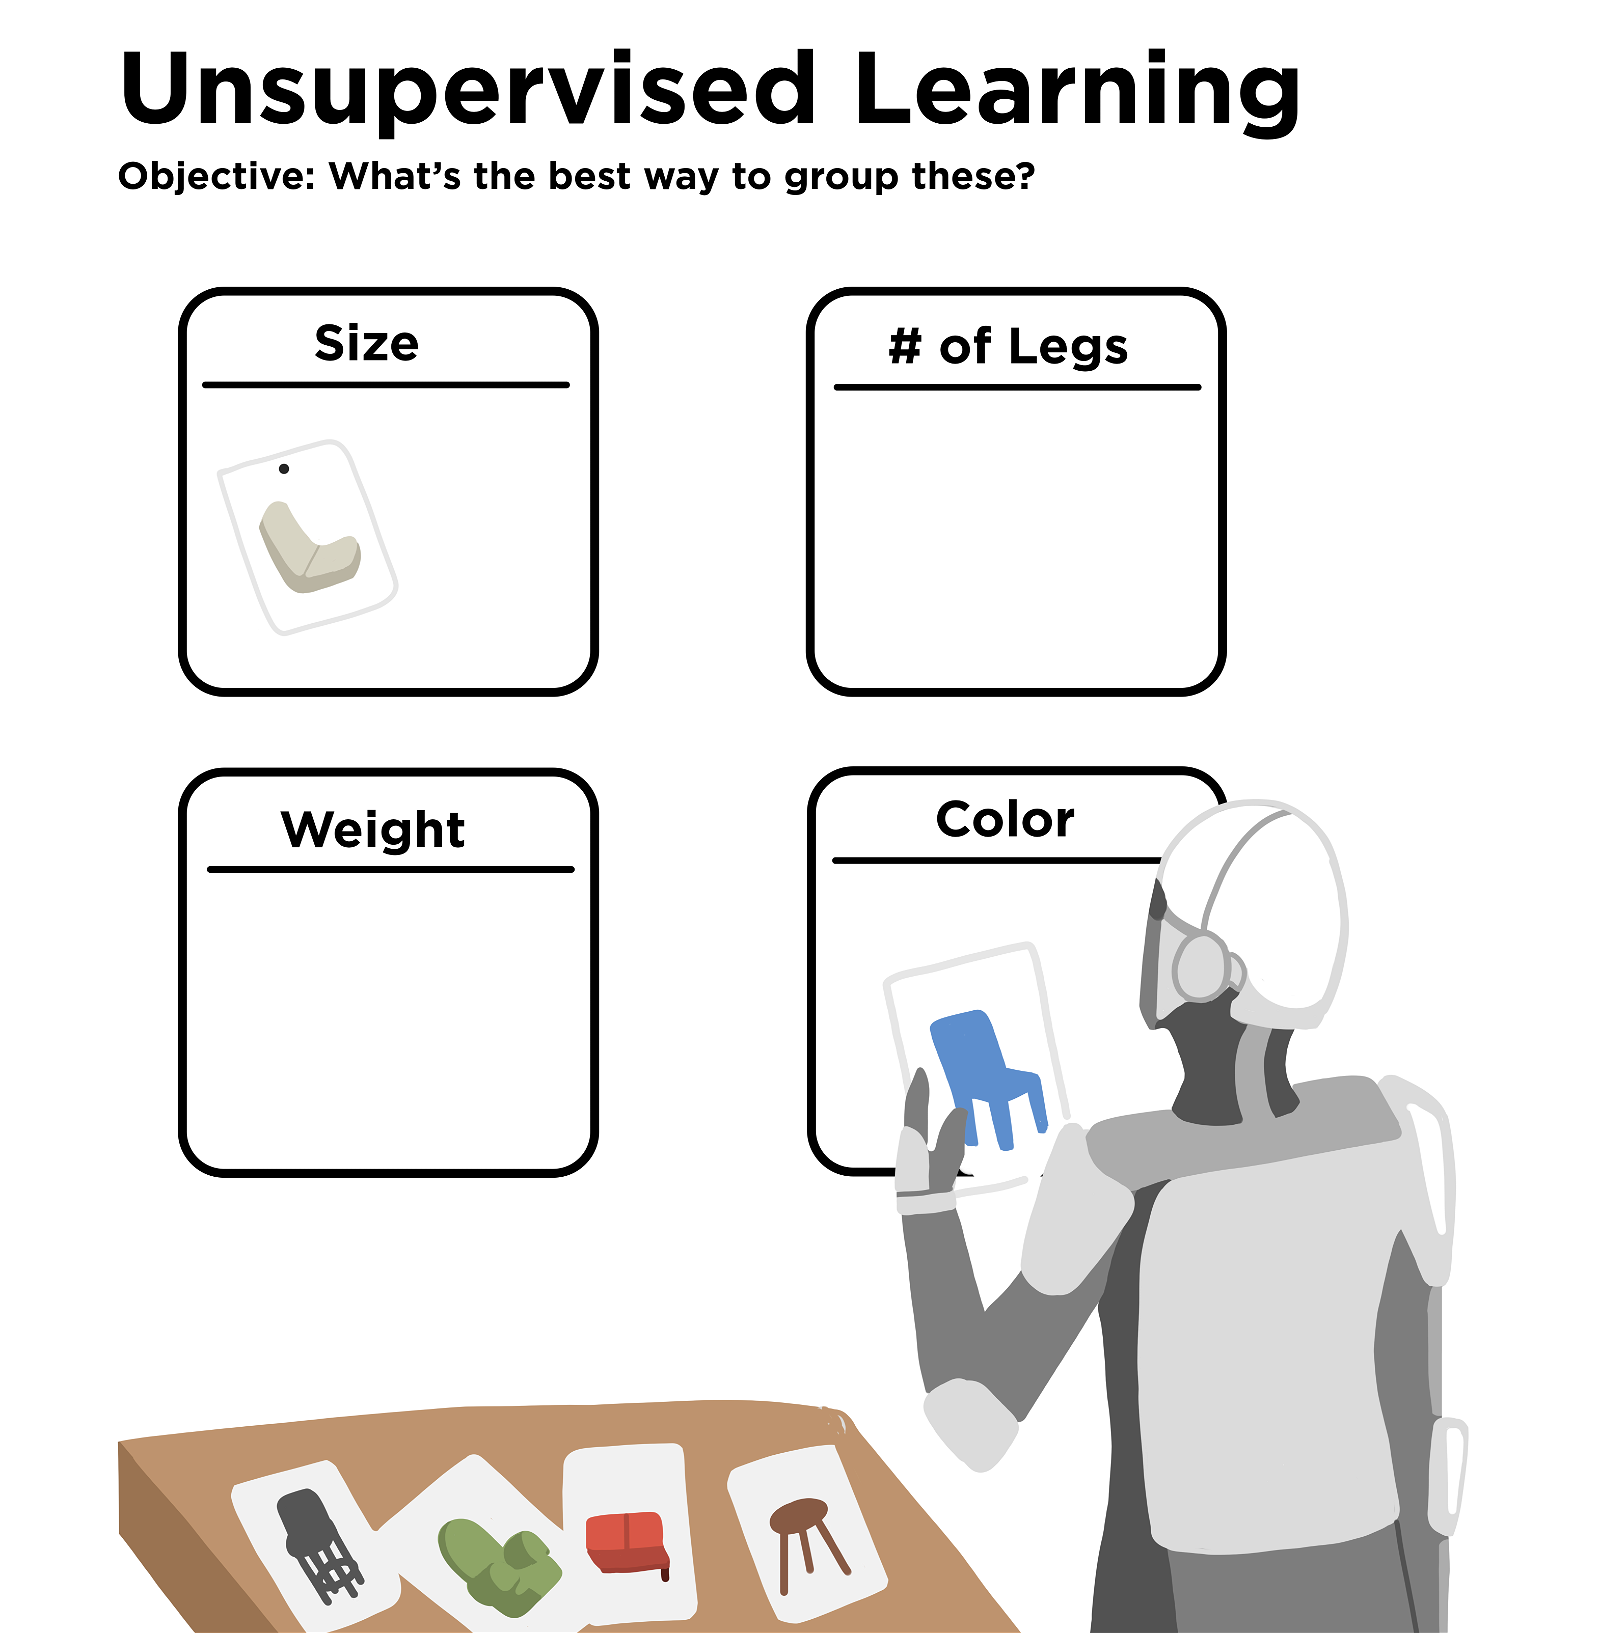 A title at the top states “Unsupervised Learning” with a subtitle underneath that says “Objective: What’s the best way to group these?” A robotic figure stands looking at four posters. On a table in front of the figure are four cards representing a black tall chair, a green stuffed chair, a red ottoman, and a brown three-legged stool. The figure holds a card with a blue chair on it. One poster has “Size” written on it and has a card showing a white banana chair pinned to it. The other posters have written on them “# of Legs,” “Weight,” and “Color.”